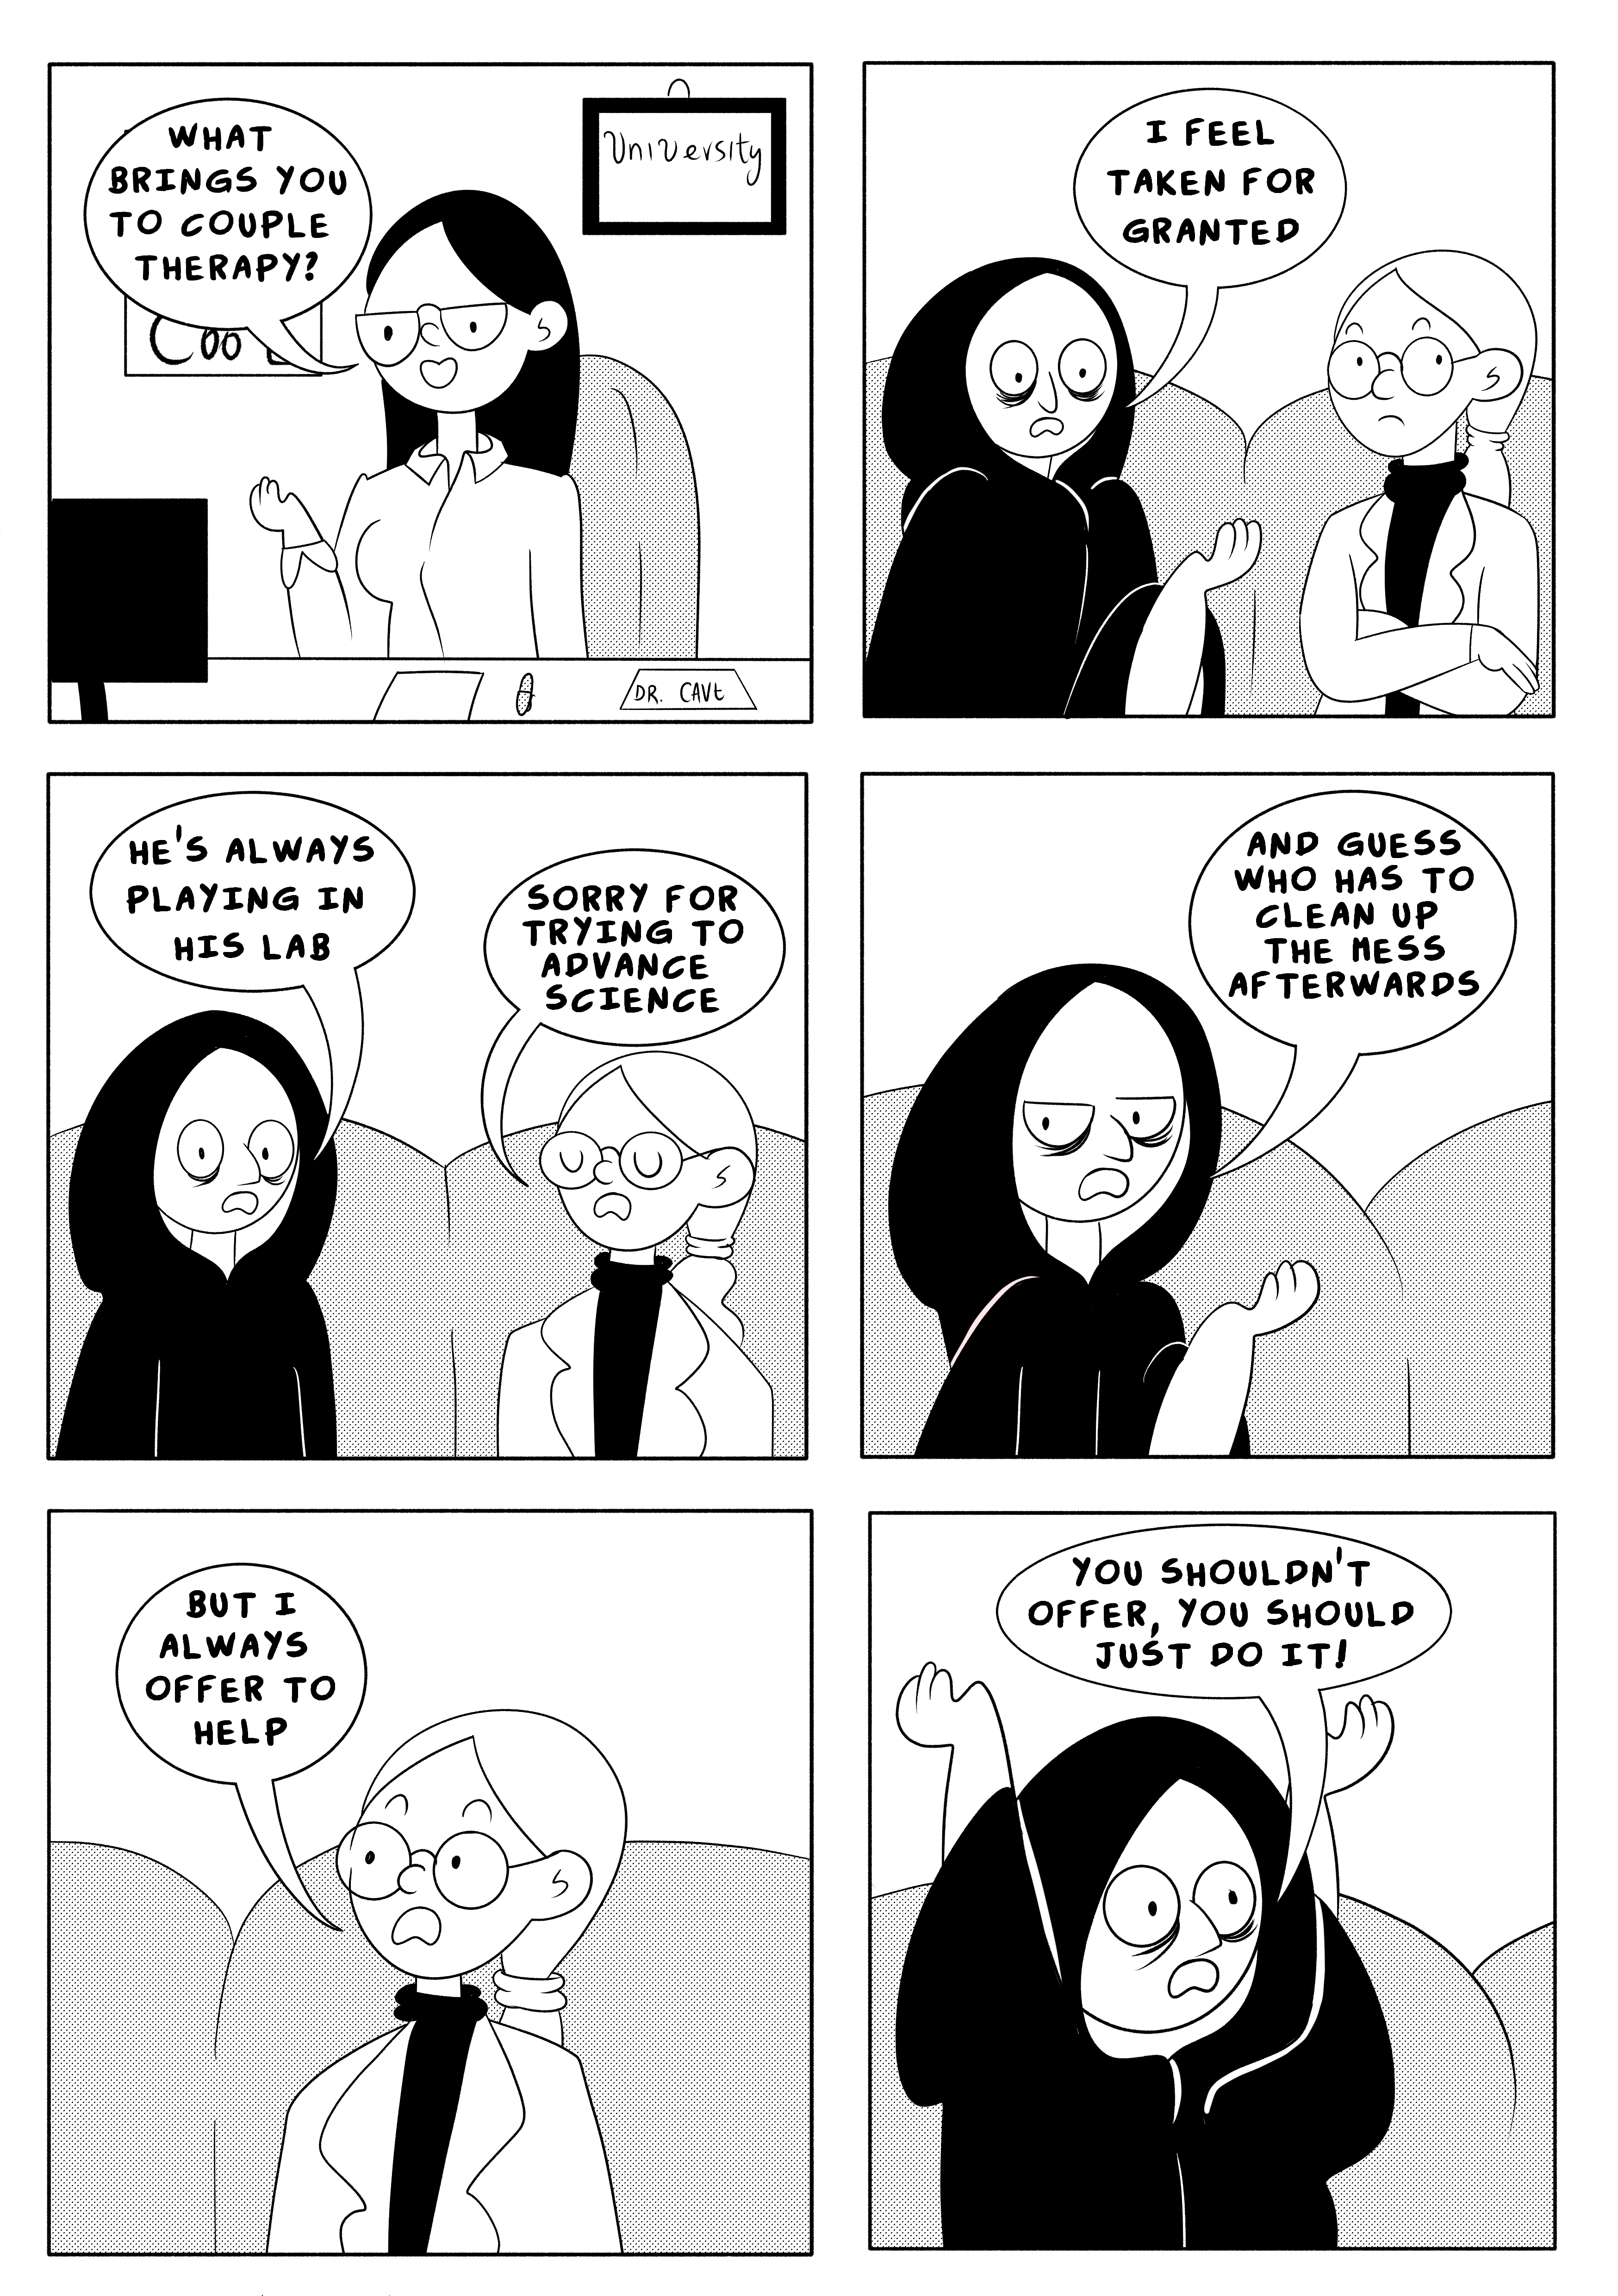 couple therapy comic